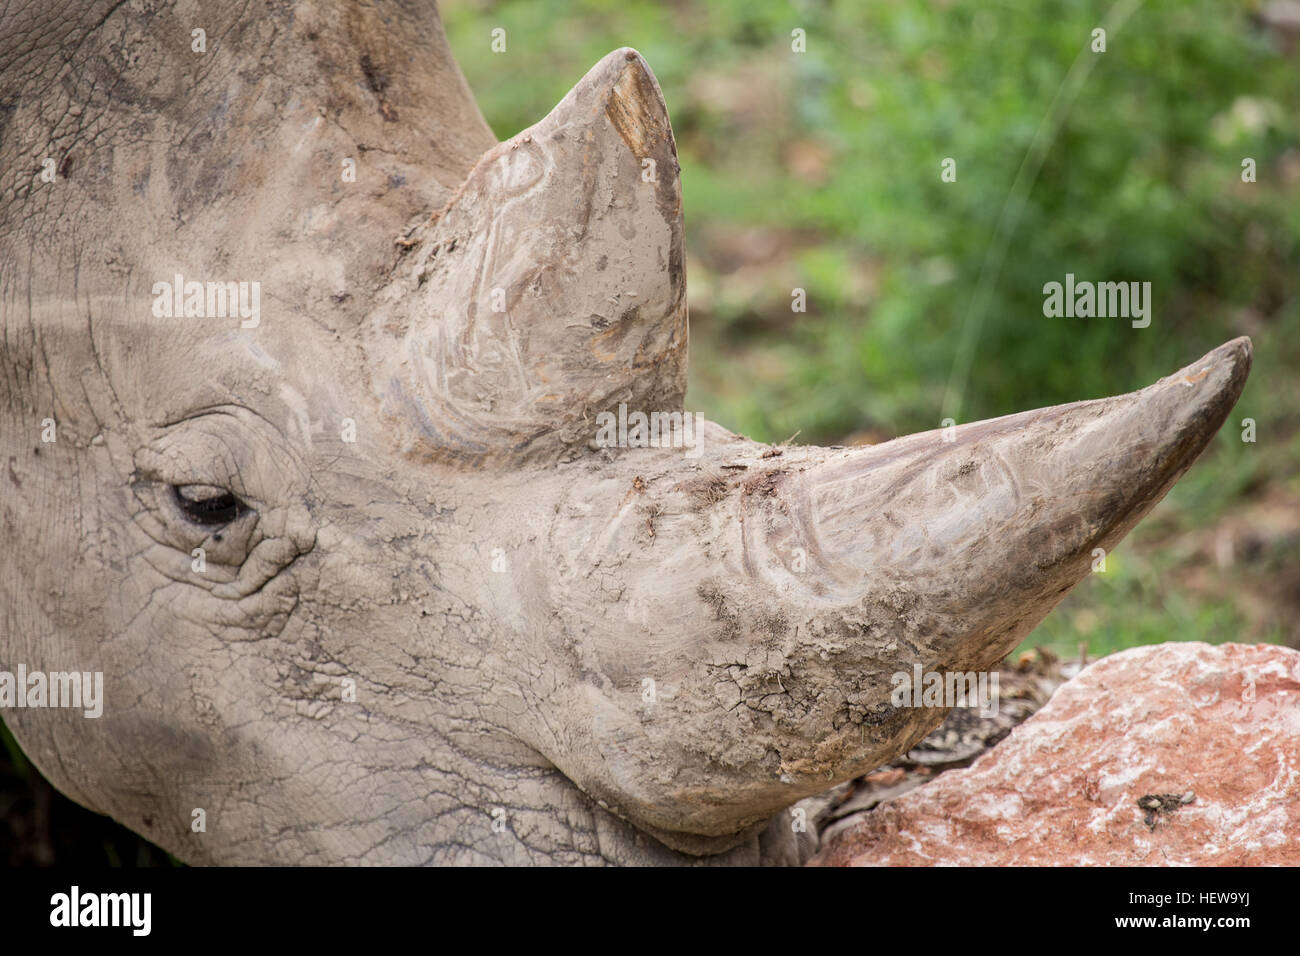 Closeup of the two horns of a white rhinoceros or square-lipped rhinoceros, Ceratotherium simum. Rhino horn can fetch tens of thousands of dollars per Stock Photo